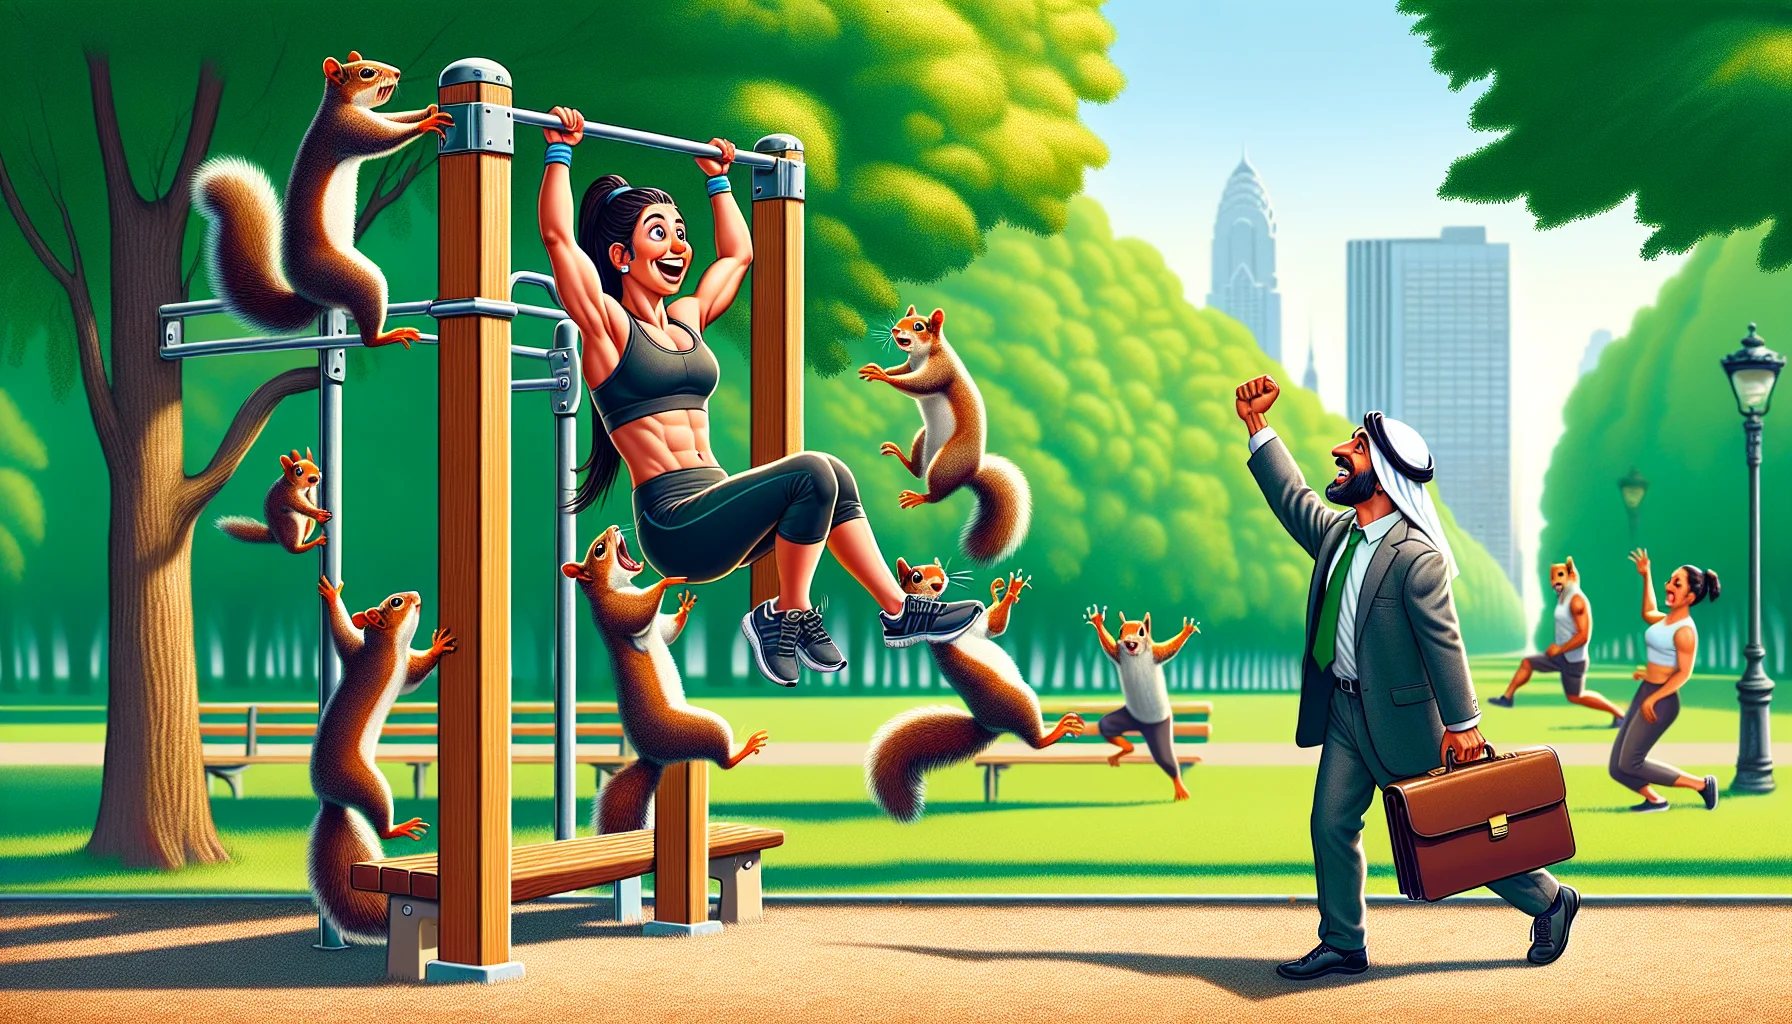 An amusing and realistic depiction of calisthenics back exercises. An enthusiastic Hispanic woman in workout gear joyfully performs a back lever on a pull-up bar at a public park. She finds herself accompanied by a group of friendly squirrels imitating her movements on the tree branches above. Unexpectedly, a Middle-Eastern man passing by, dressed in a business suit and holding a briefcase, can't help but join in performing a human flag on a nearby pole. The overall imagery inspiring a sense of fun and motivation to engage in fitness activities.